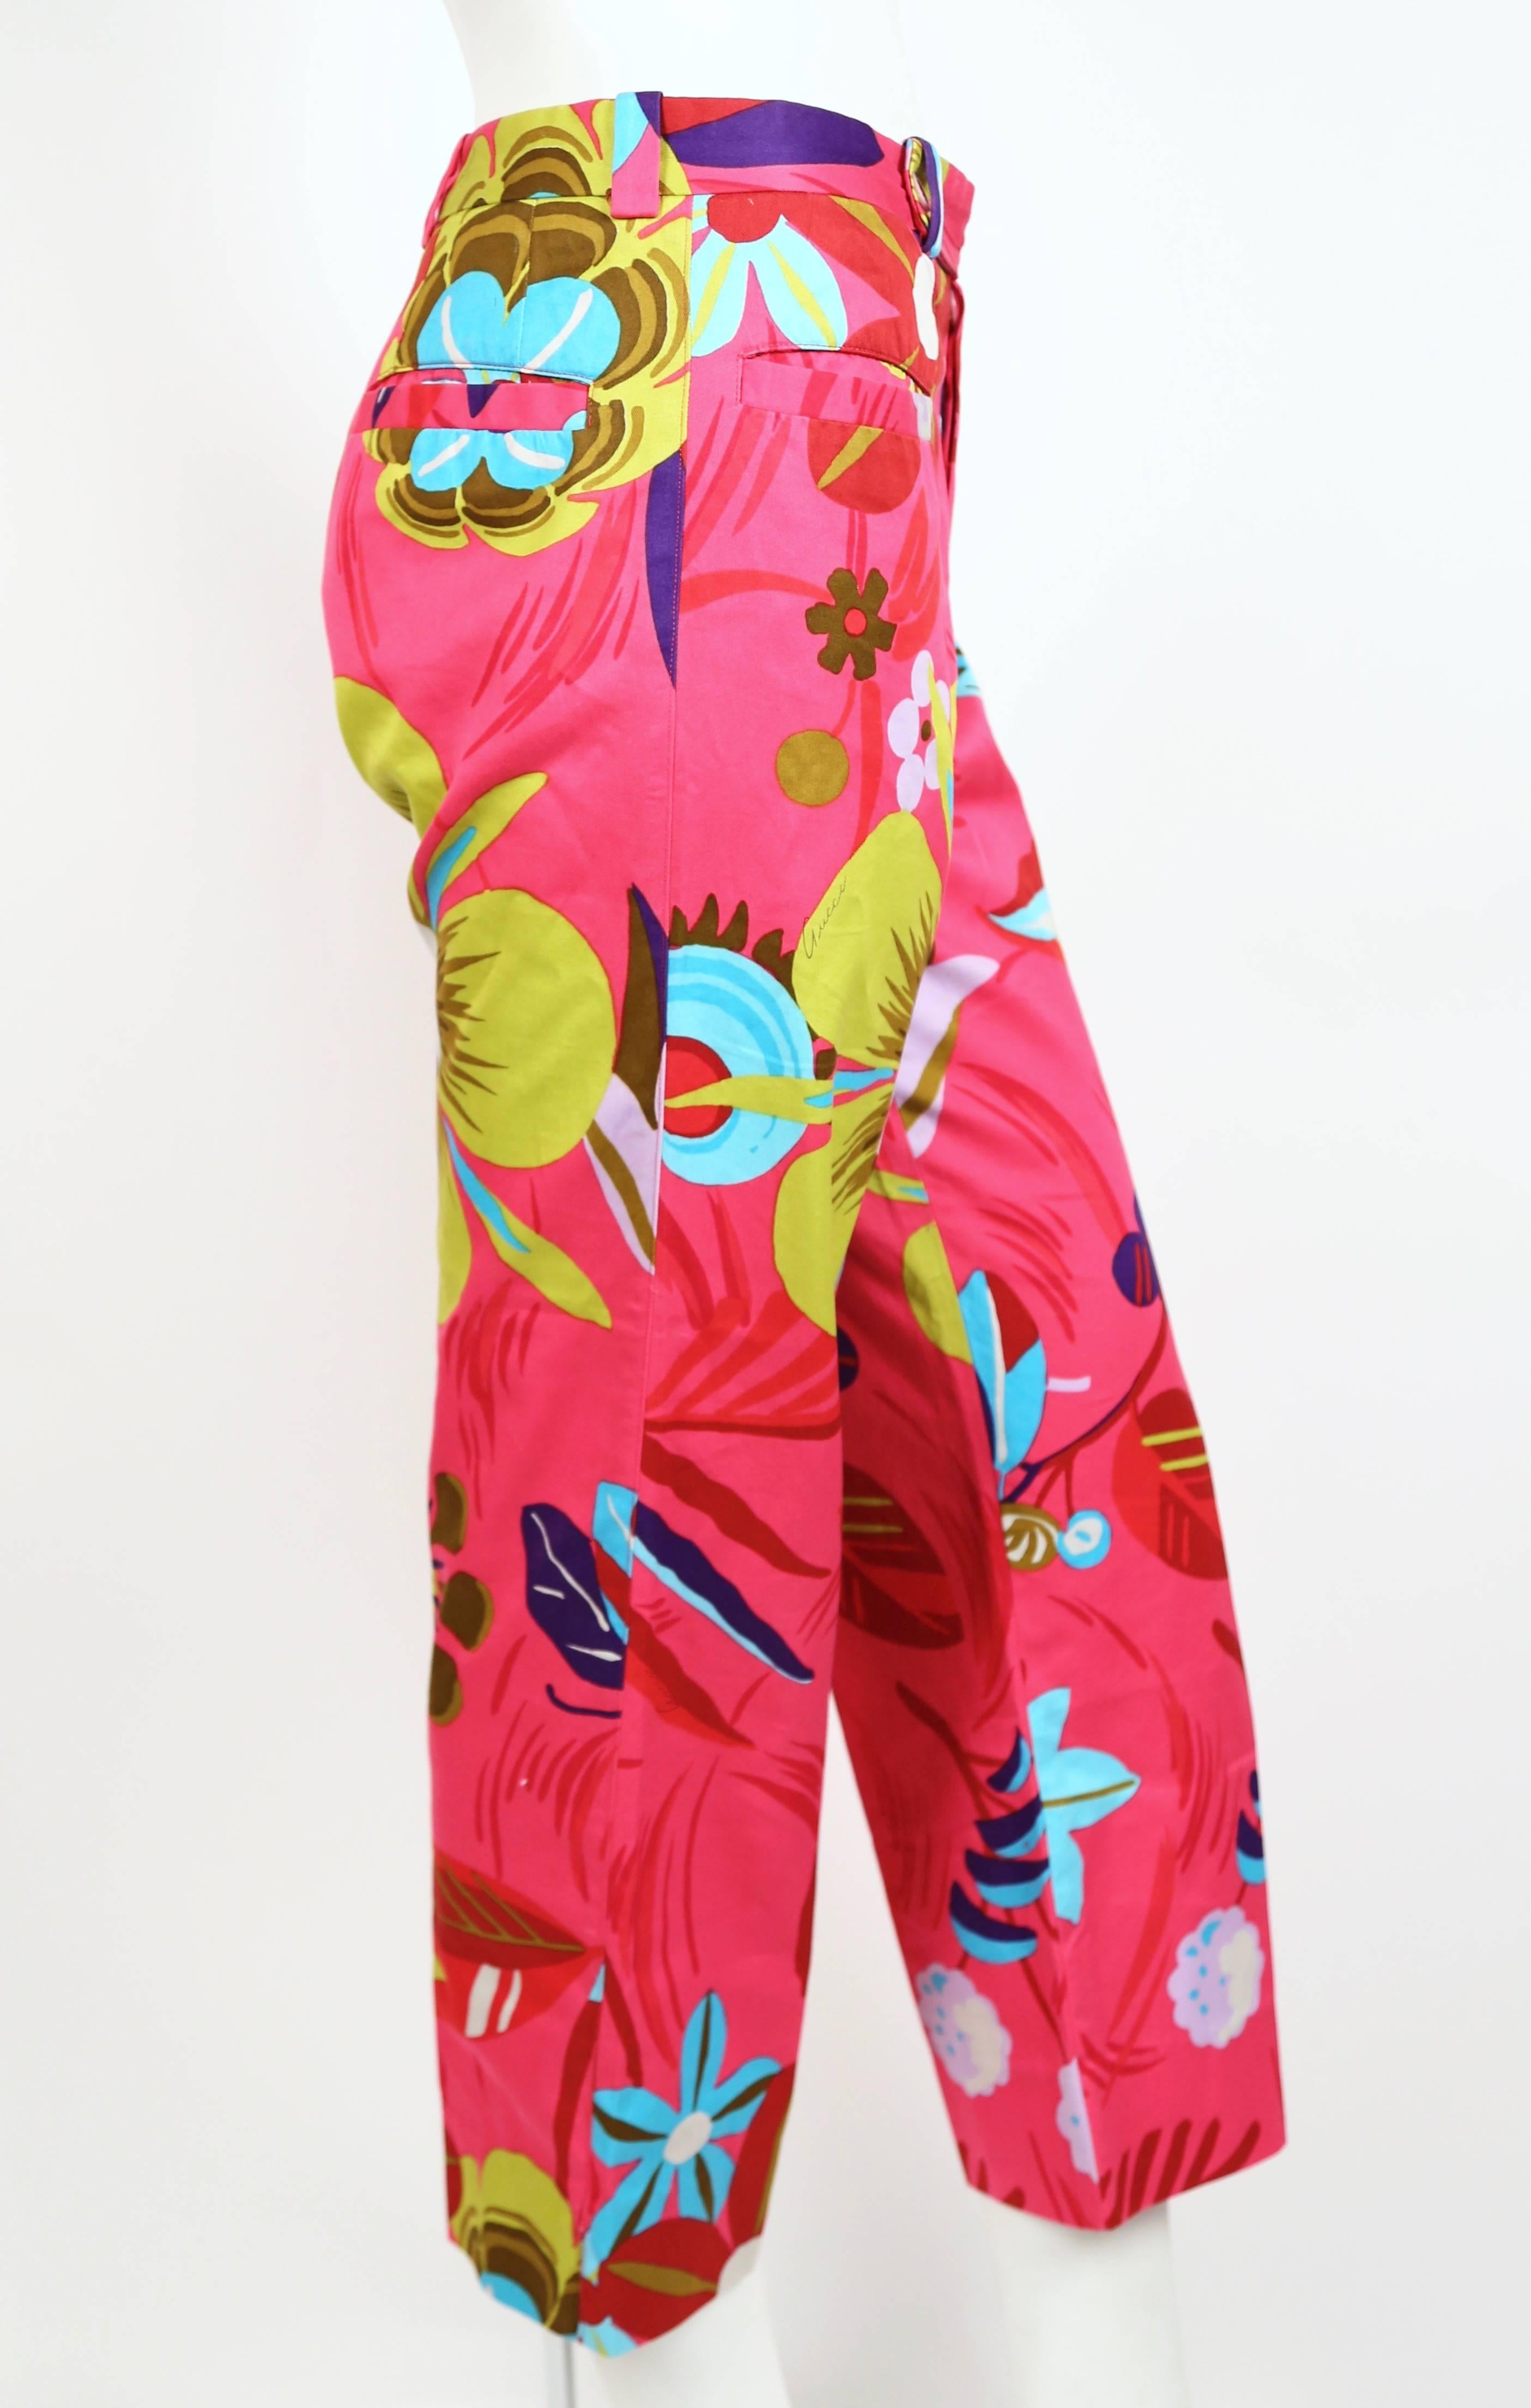 Vibrant floral printed pants with low rise and wide cropped legs designed by Tom Ford for Gucci dating to spring of 1999. Exactly as seen on the runway. Italian size 38. Approximate measurements: low waist 28.5